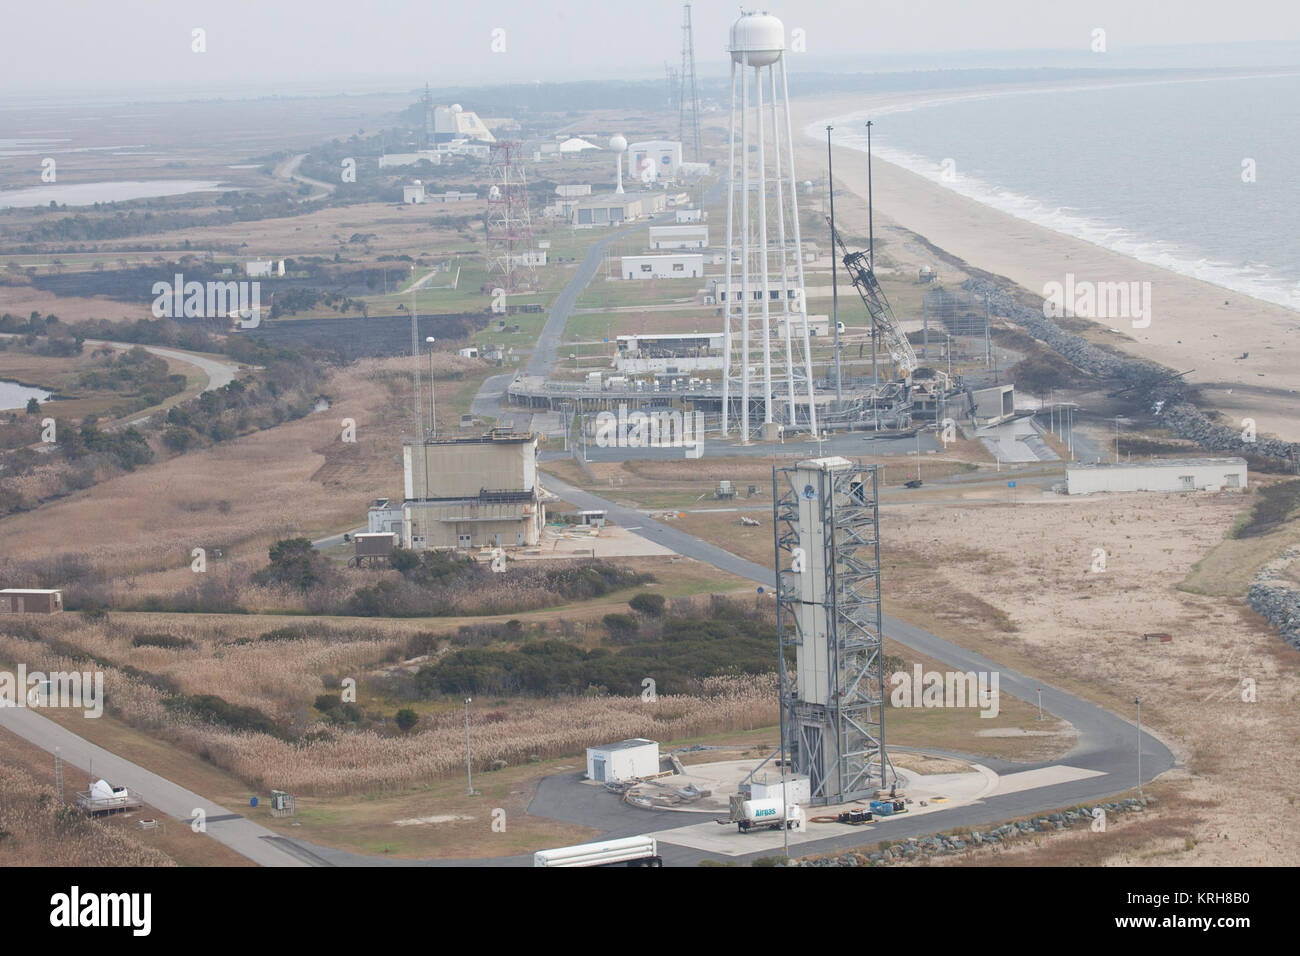 An aerial view of the Wallops Island launch facilities taken by the Wallops Incident Response Team Wednesday, Oct. 29, 2014 following the failed launch attempt of Orbital Science Corp.'s Antares rocket Oct. 28, Wallops Island, VA. Photo Credit: (NASA/Terry Zaperach) Aftermath of Antares Orb-3 explosion at Pad 0A (20141029b) Stock Photo